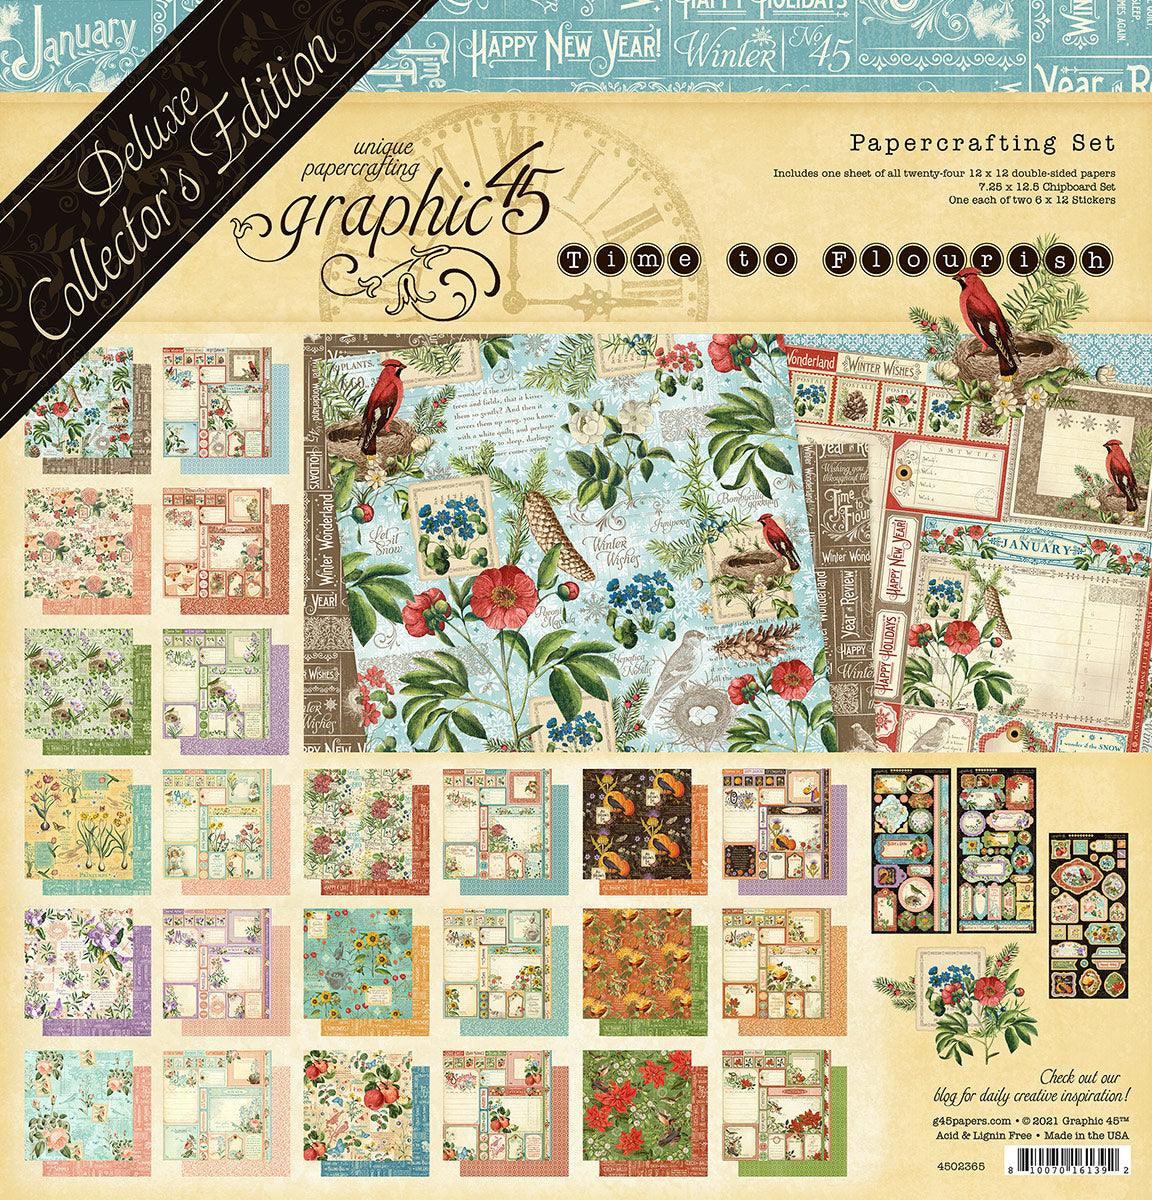 Deluxe Collector's Edition Time To Flourish Collection 12 x 12 Calendar Kit includes 24 Double-Sided Papers, Sticker Sheet & Die Cuts by Graphic 45 - Scrapbook Supply Companies